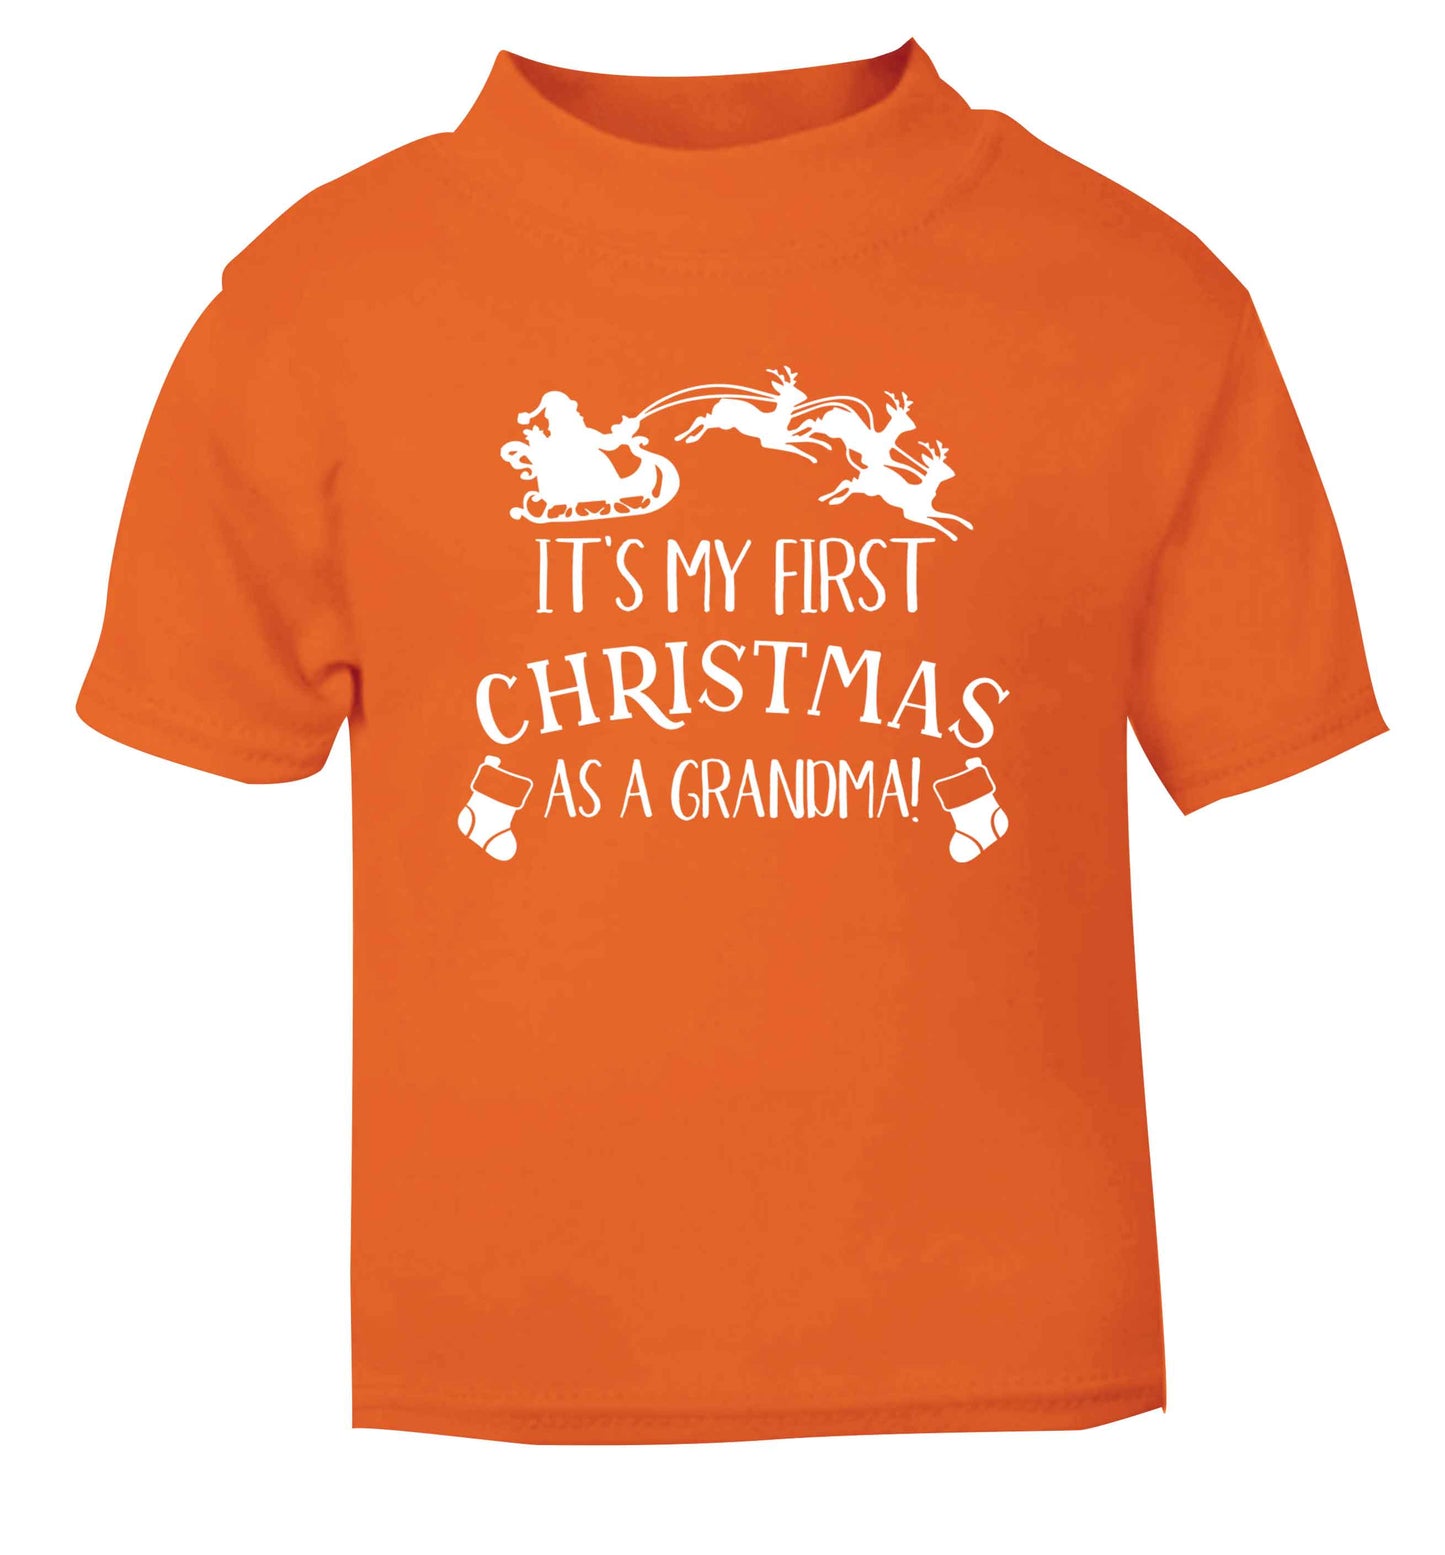 It's my first Christmas as a grandma! orange Baby Toddler Tshirt 2 Years